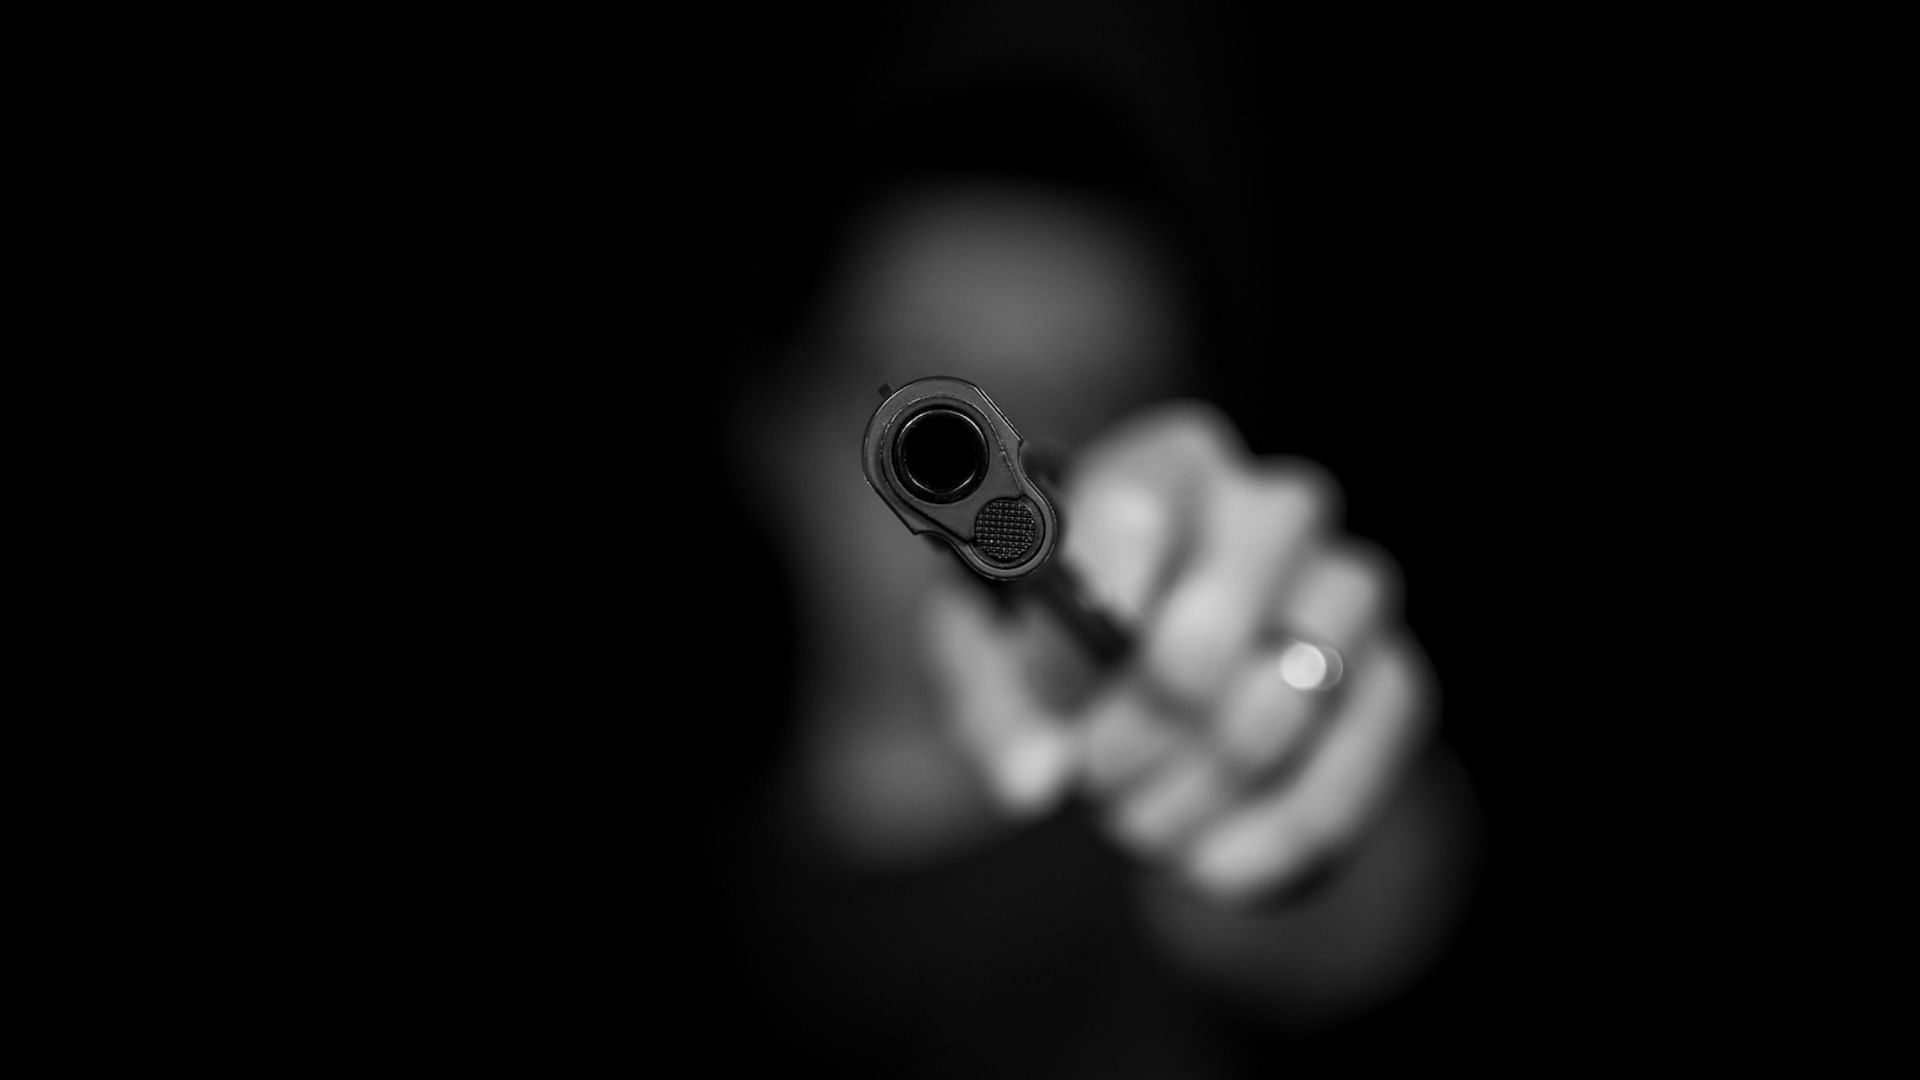 Police shooting of shoplifting suspect leaves Netizens outraged (Image via Unsplash/Max Kleinen)